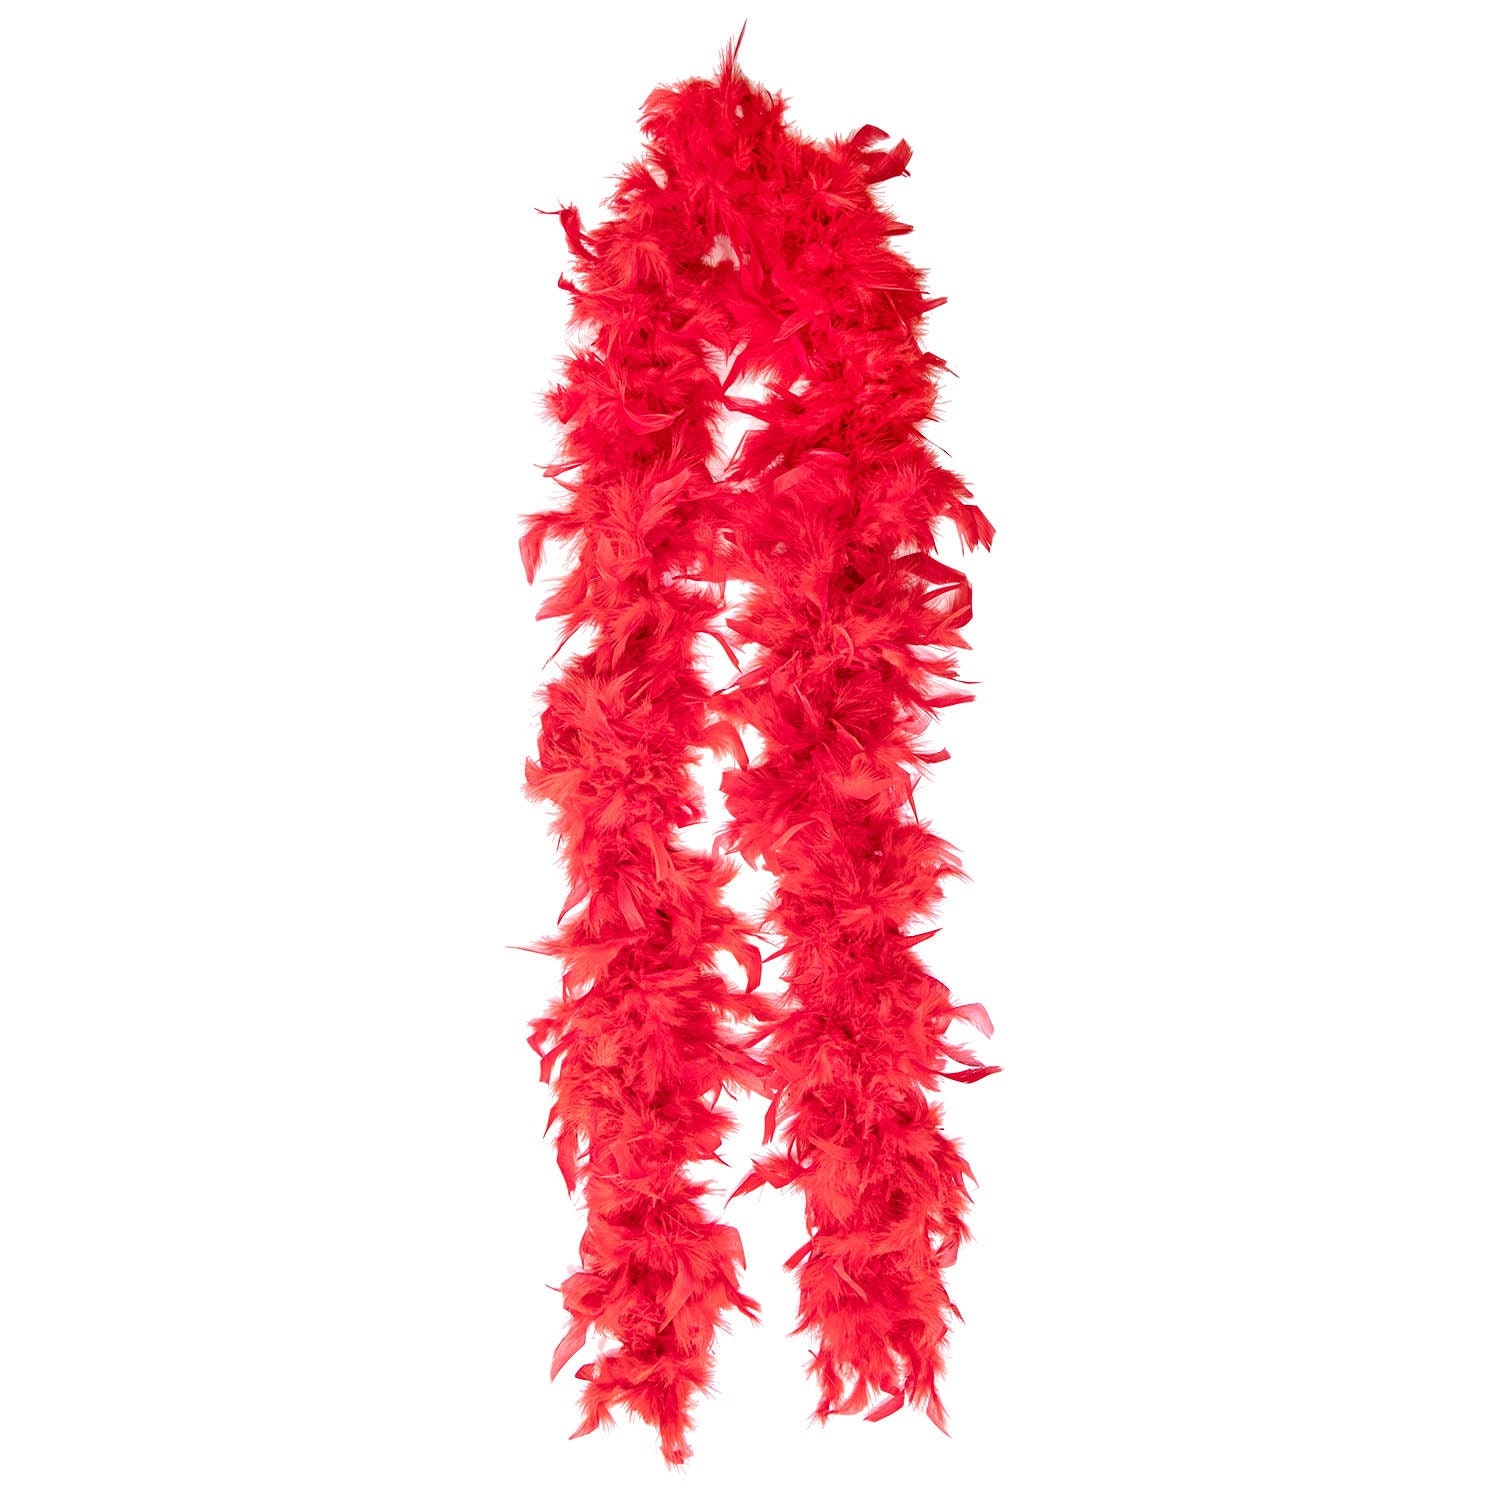 20 Gram 48 Inch Kids Feather Boas for Birthday Party and School